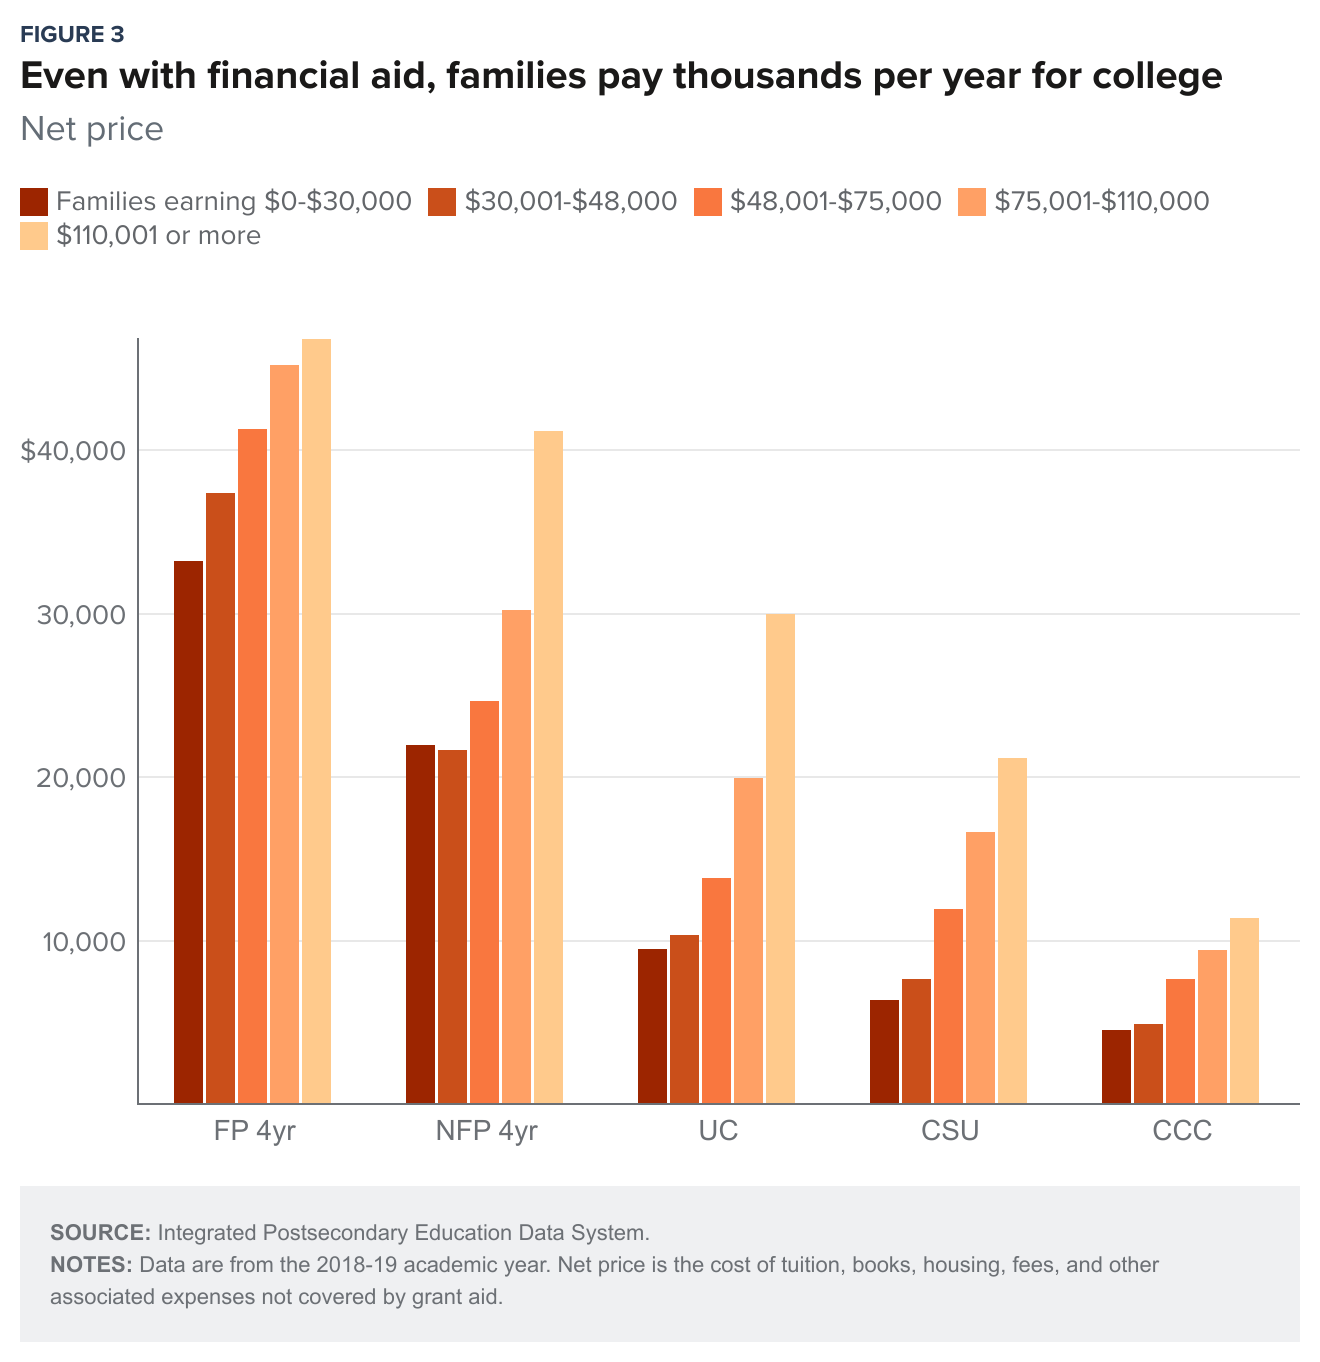 figure 3 - Even with financial aid, families pay thousands per year for college